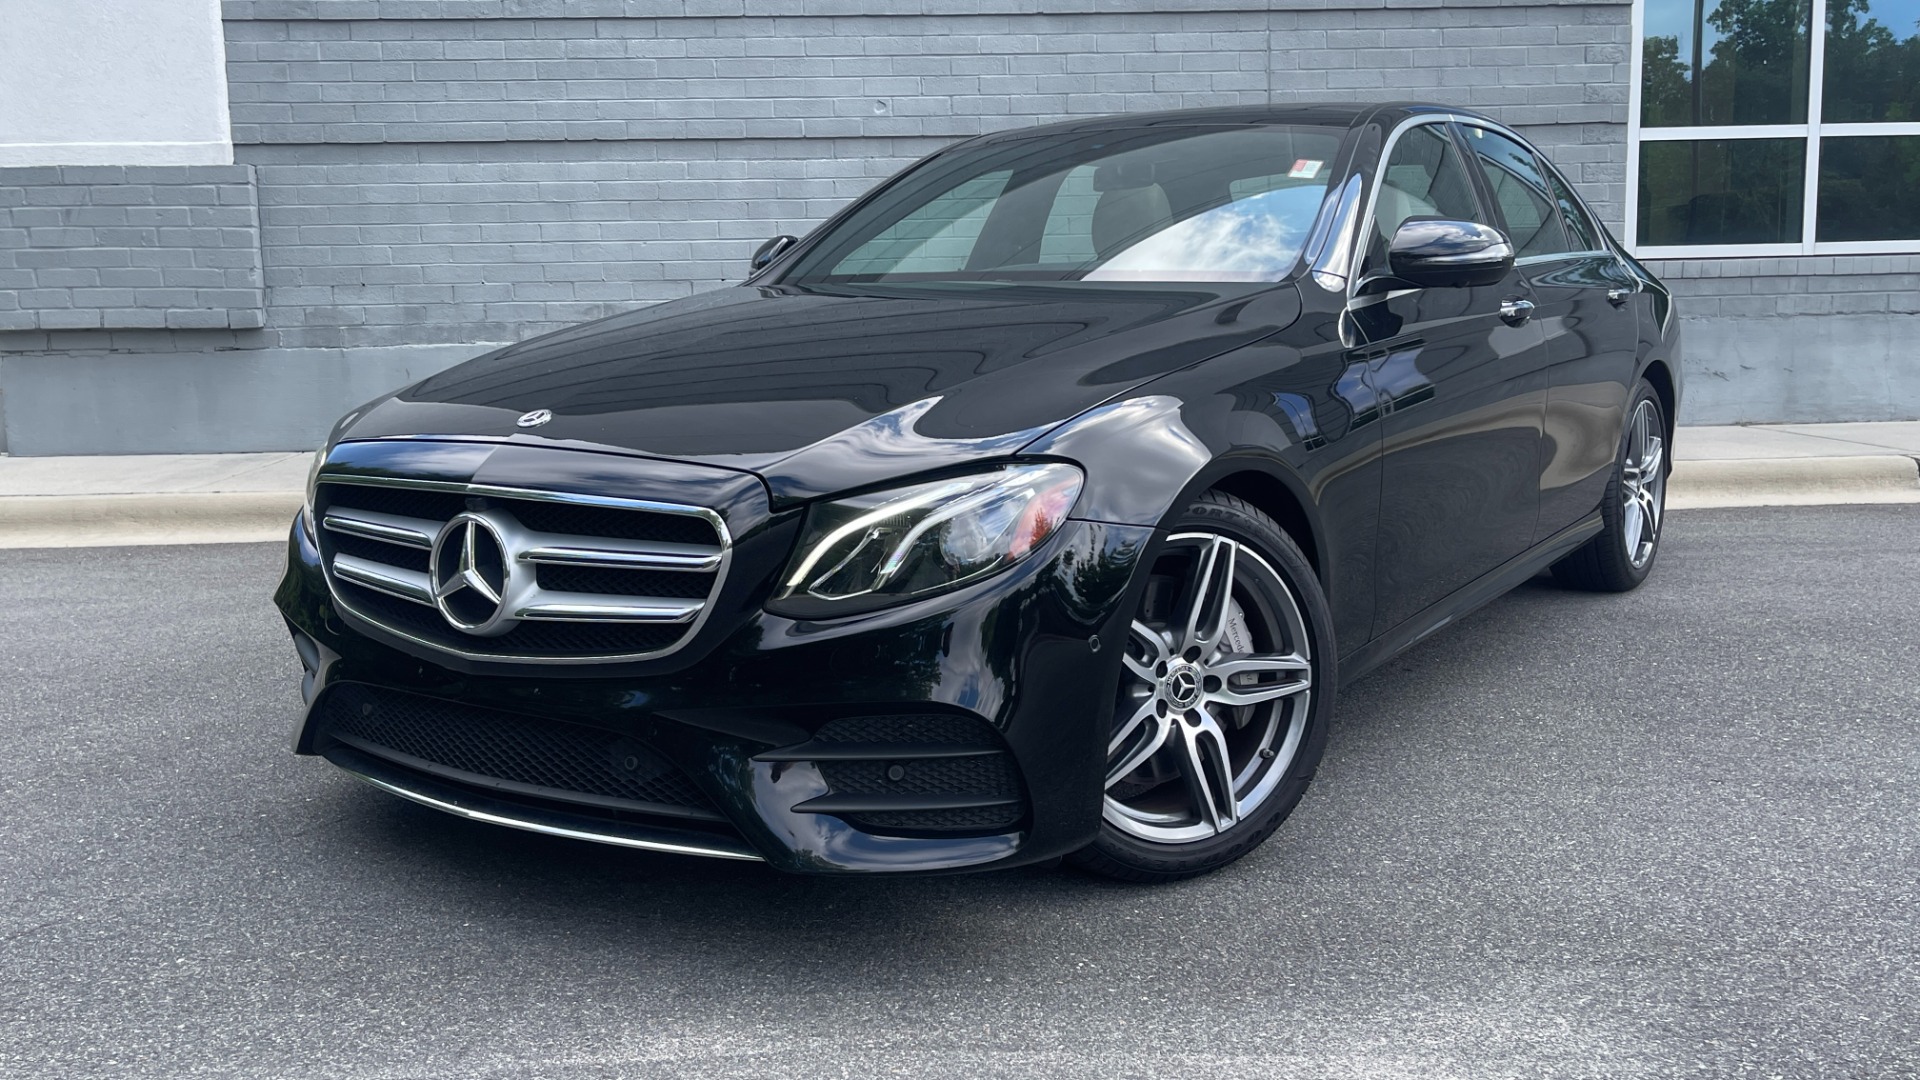 Used 2020 Mercedes-Benz E-Class E 350 / 4MATIC / AMG LINE / BURMESTER SOUND / PANORAMIC ROOF for sale $52,999 at Formula Imports in Charlotte NC 28227 1